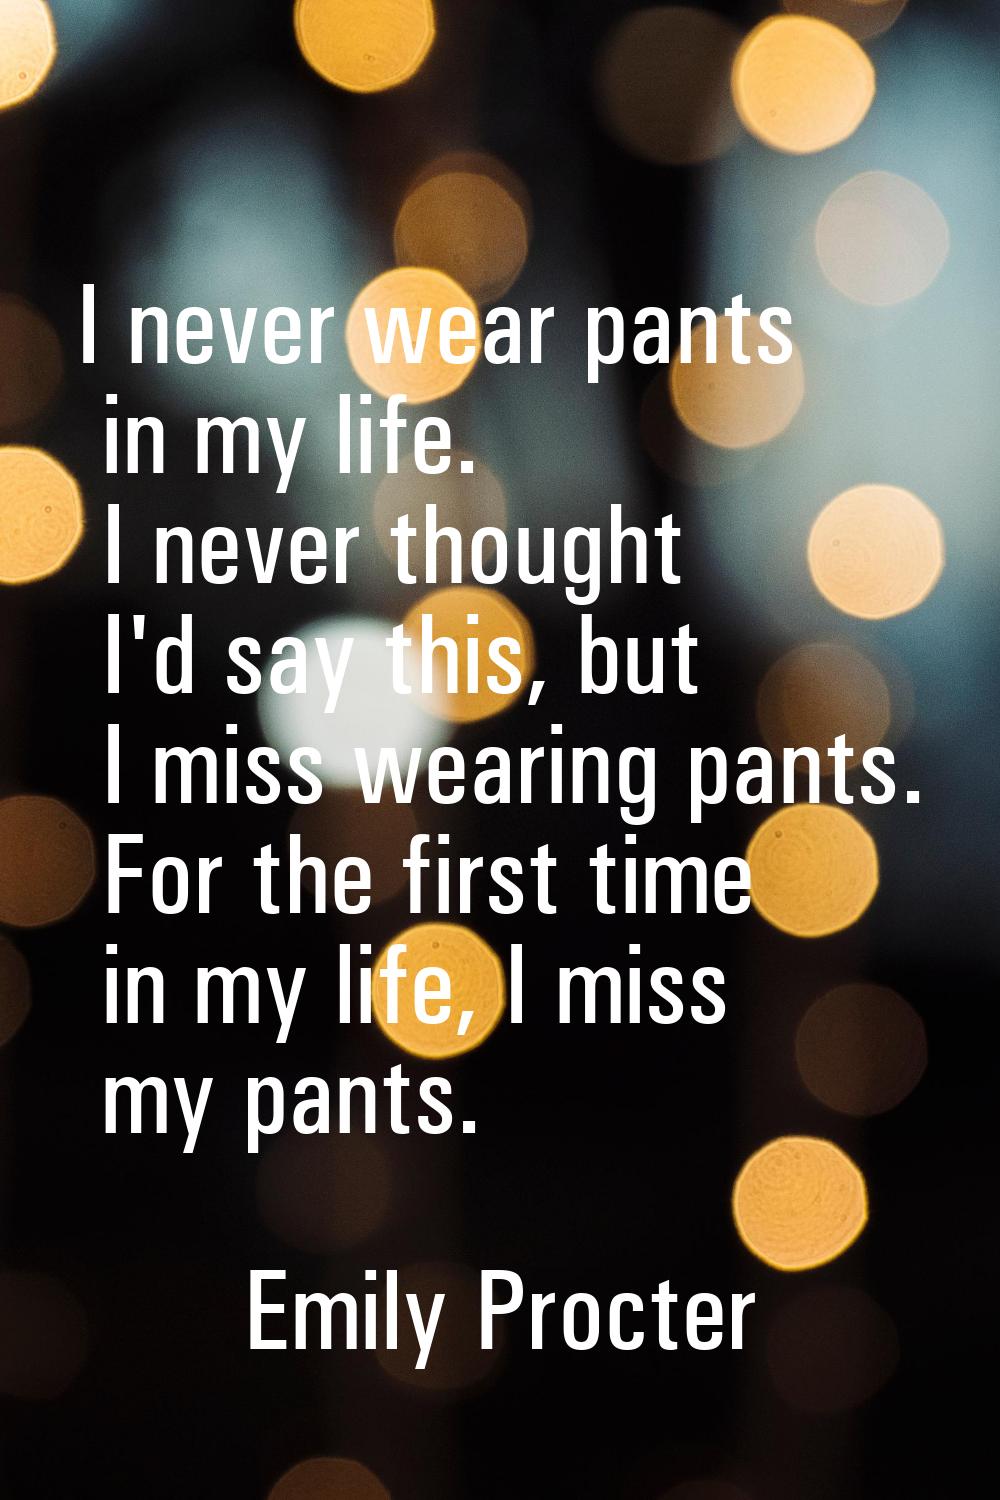 I never wear pants in my life. I never thought I'd say this, but I miss wearing pants. For the firs